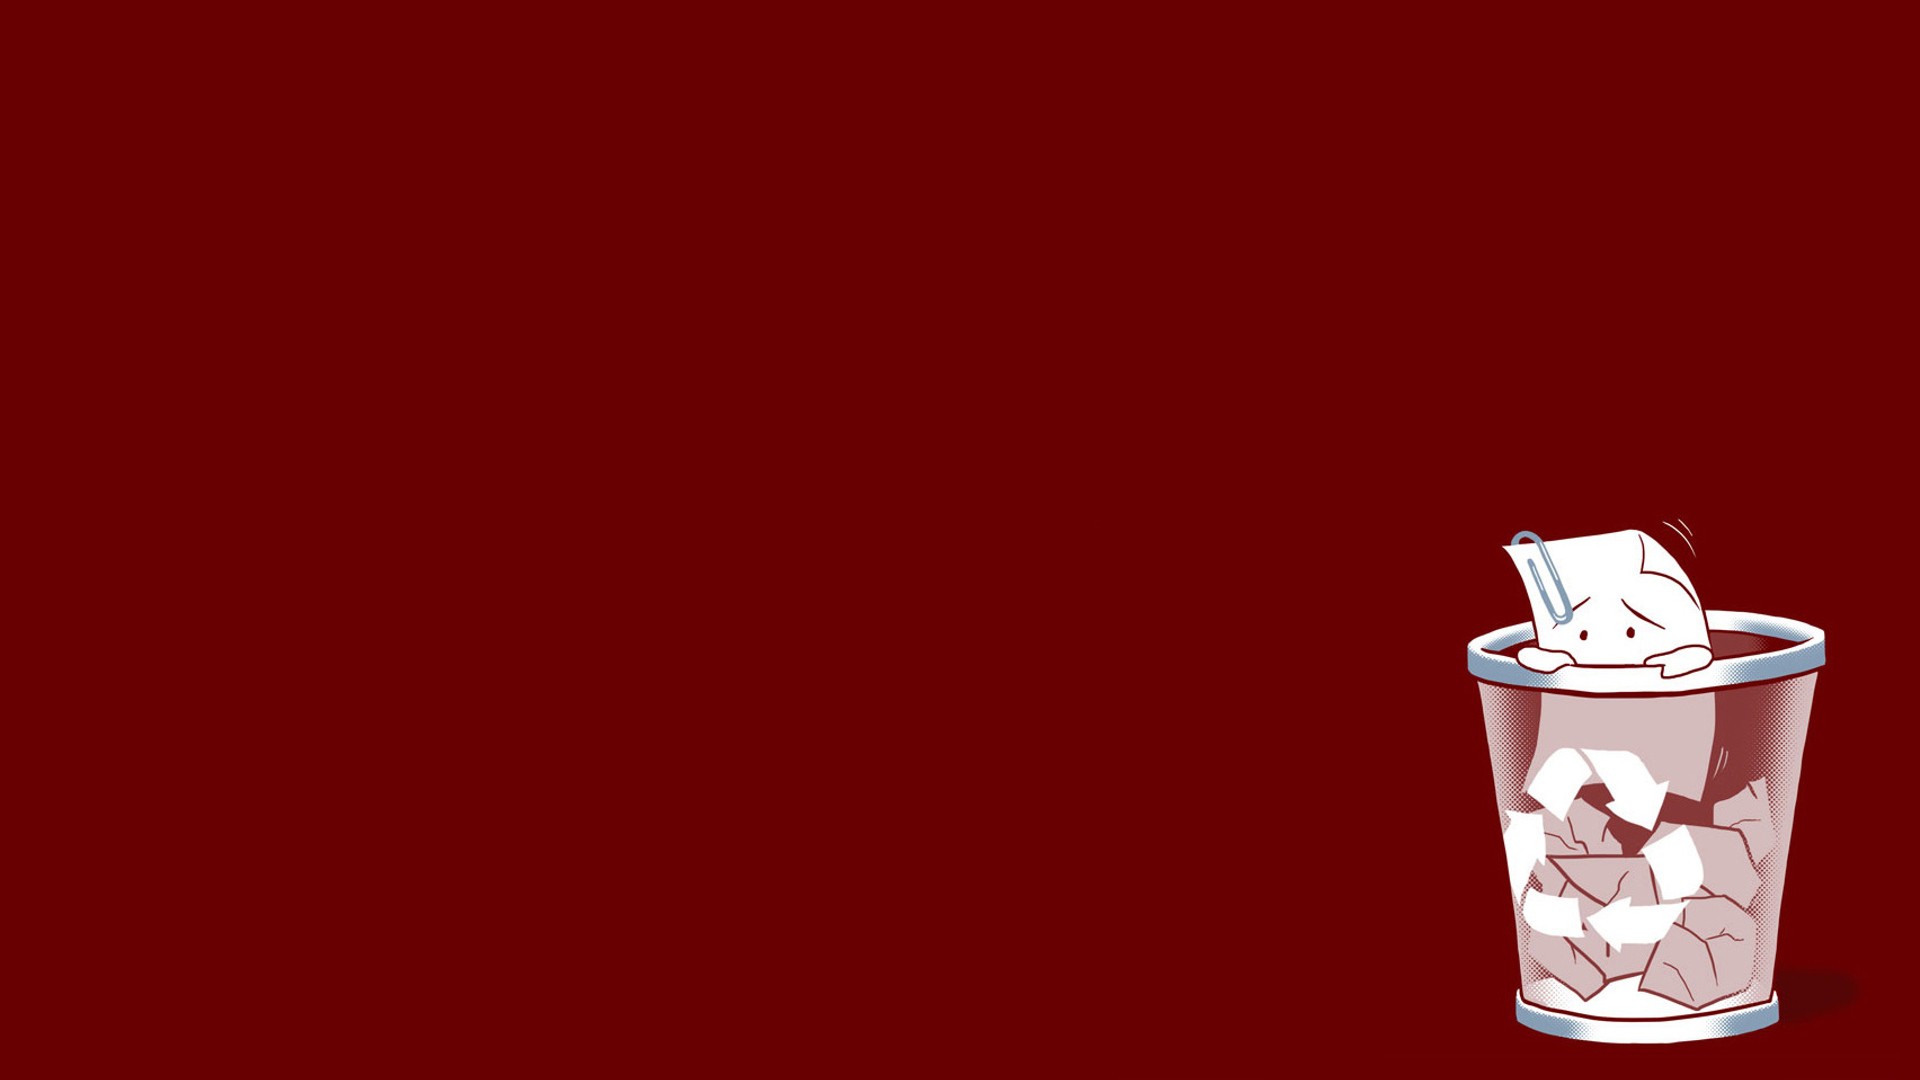 Red Pages Paper Simple Background Humor 1920x1080